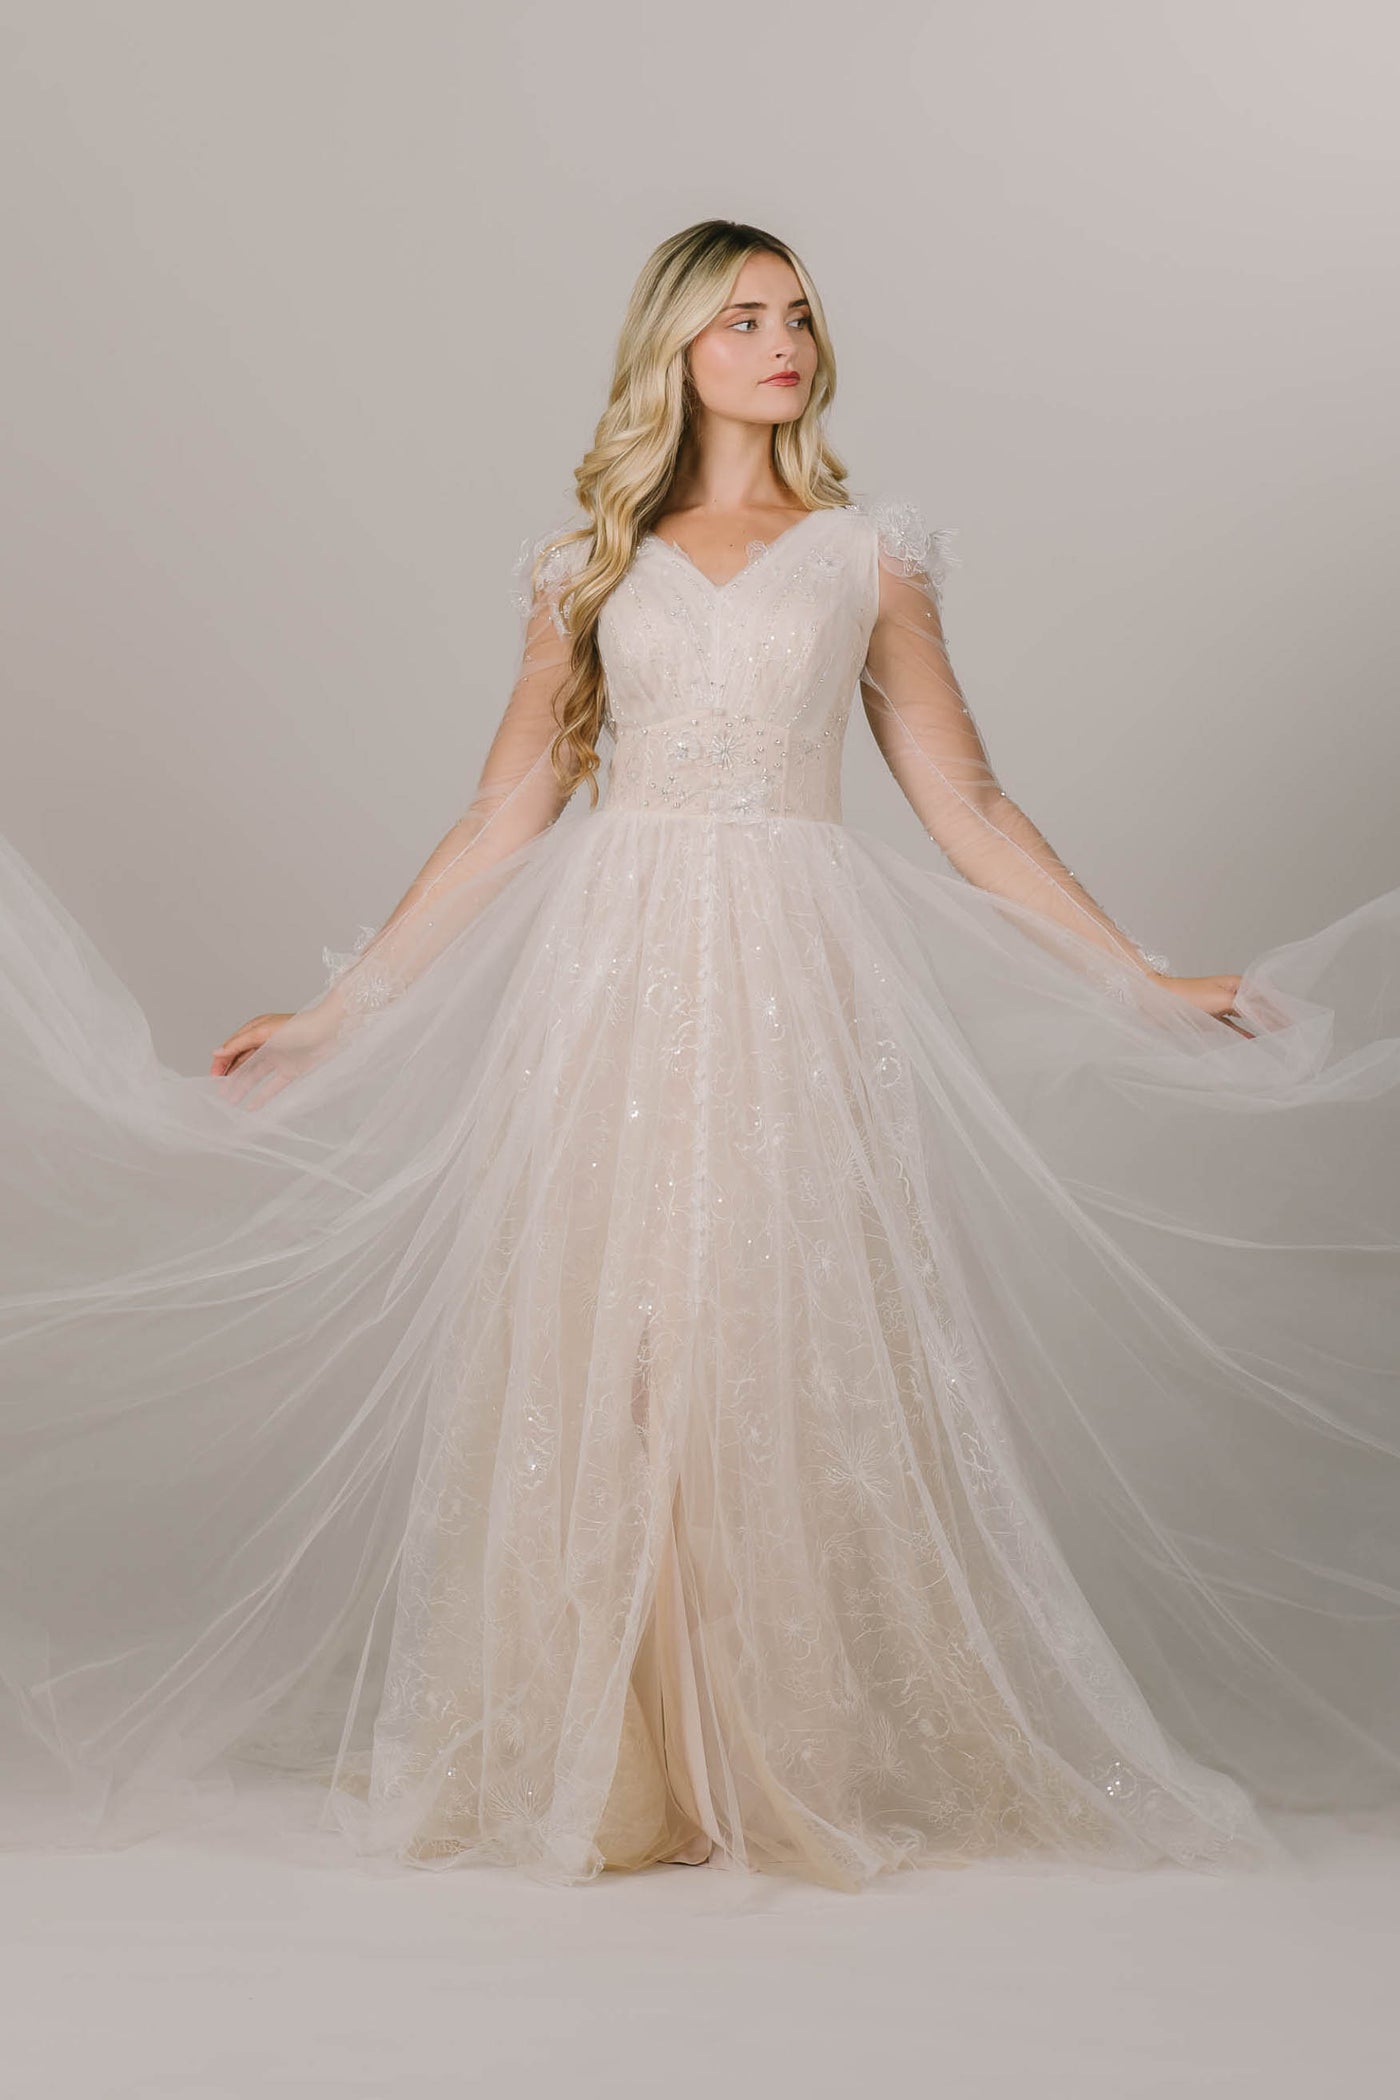 This is a modest wedding dress being shown as flowy and airy.